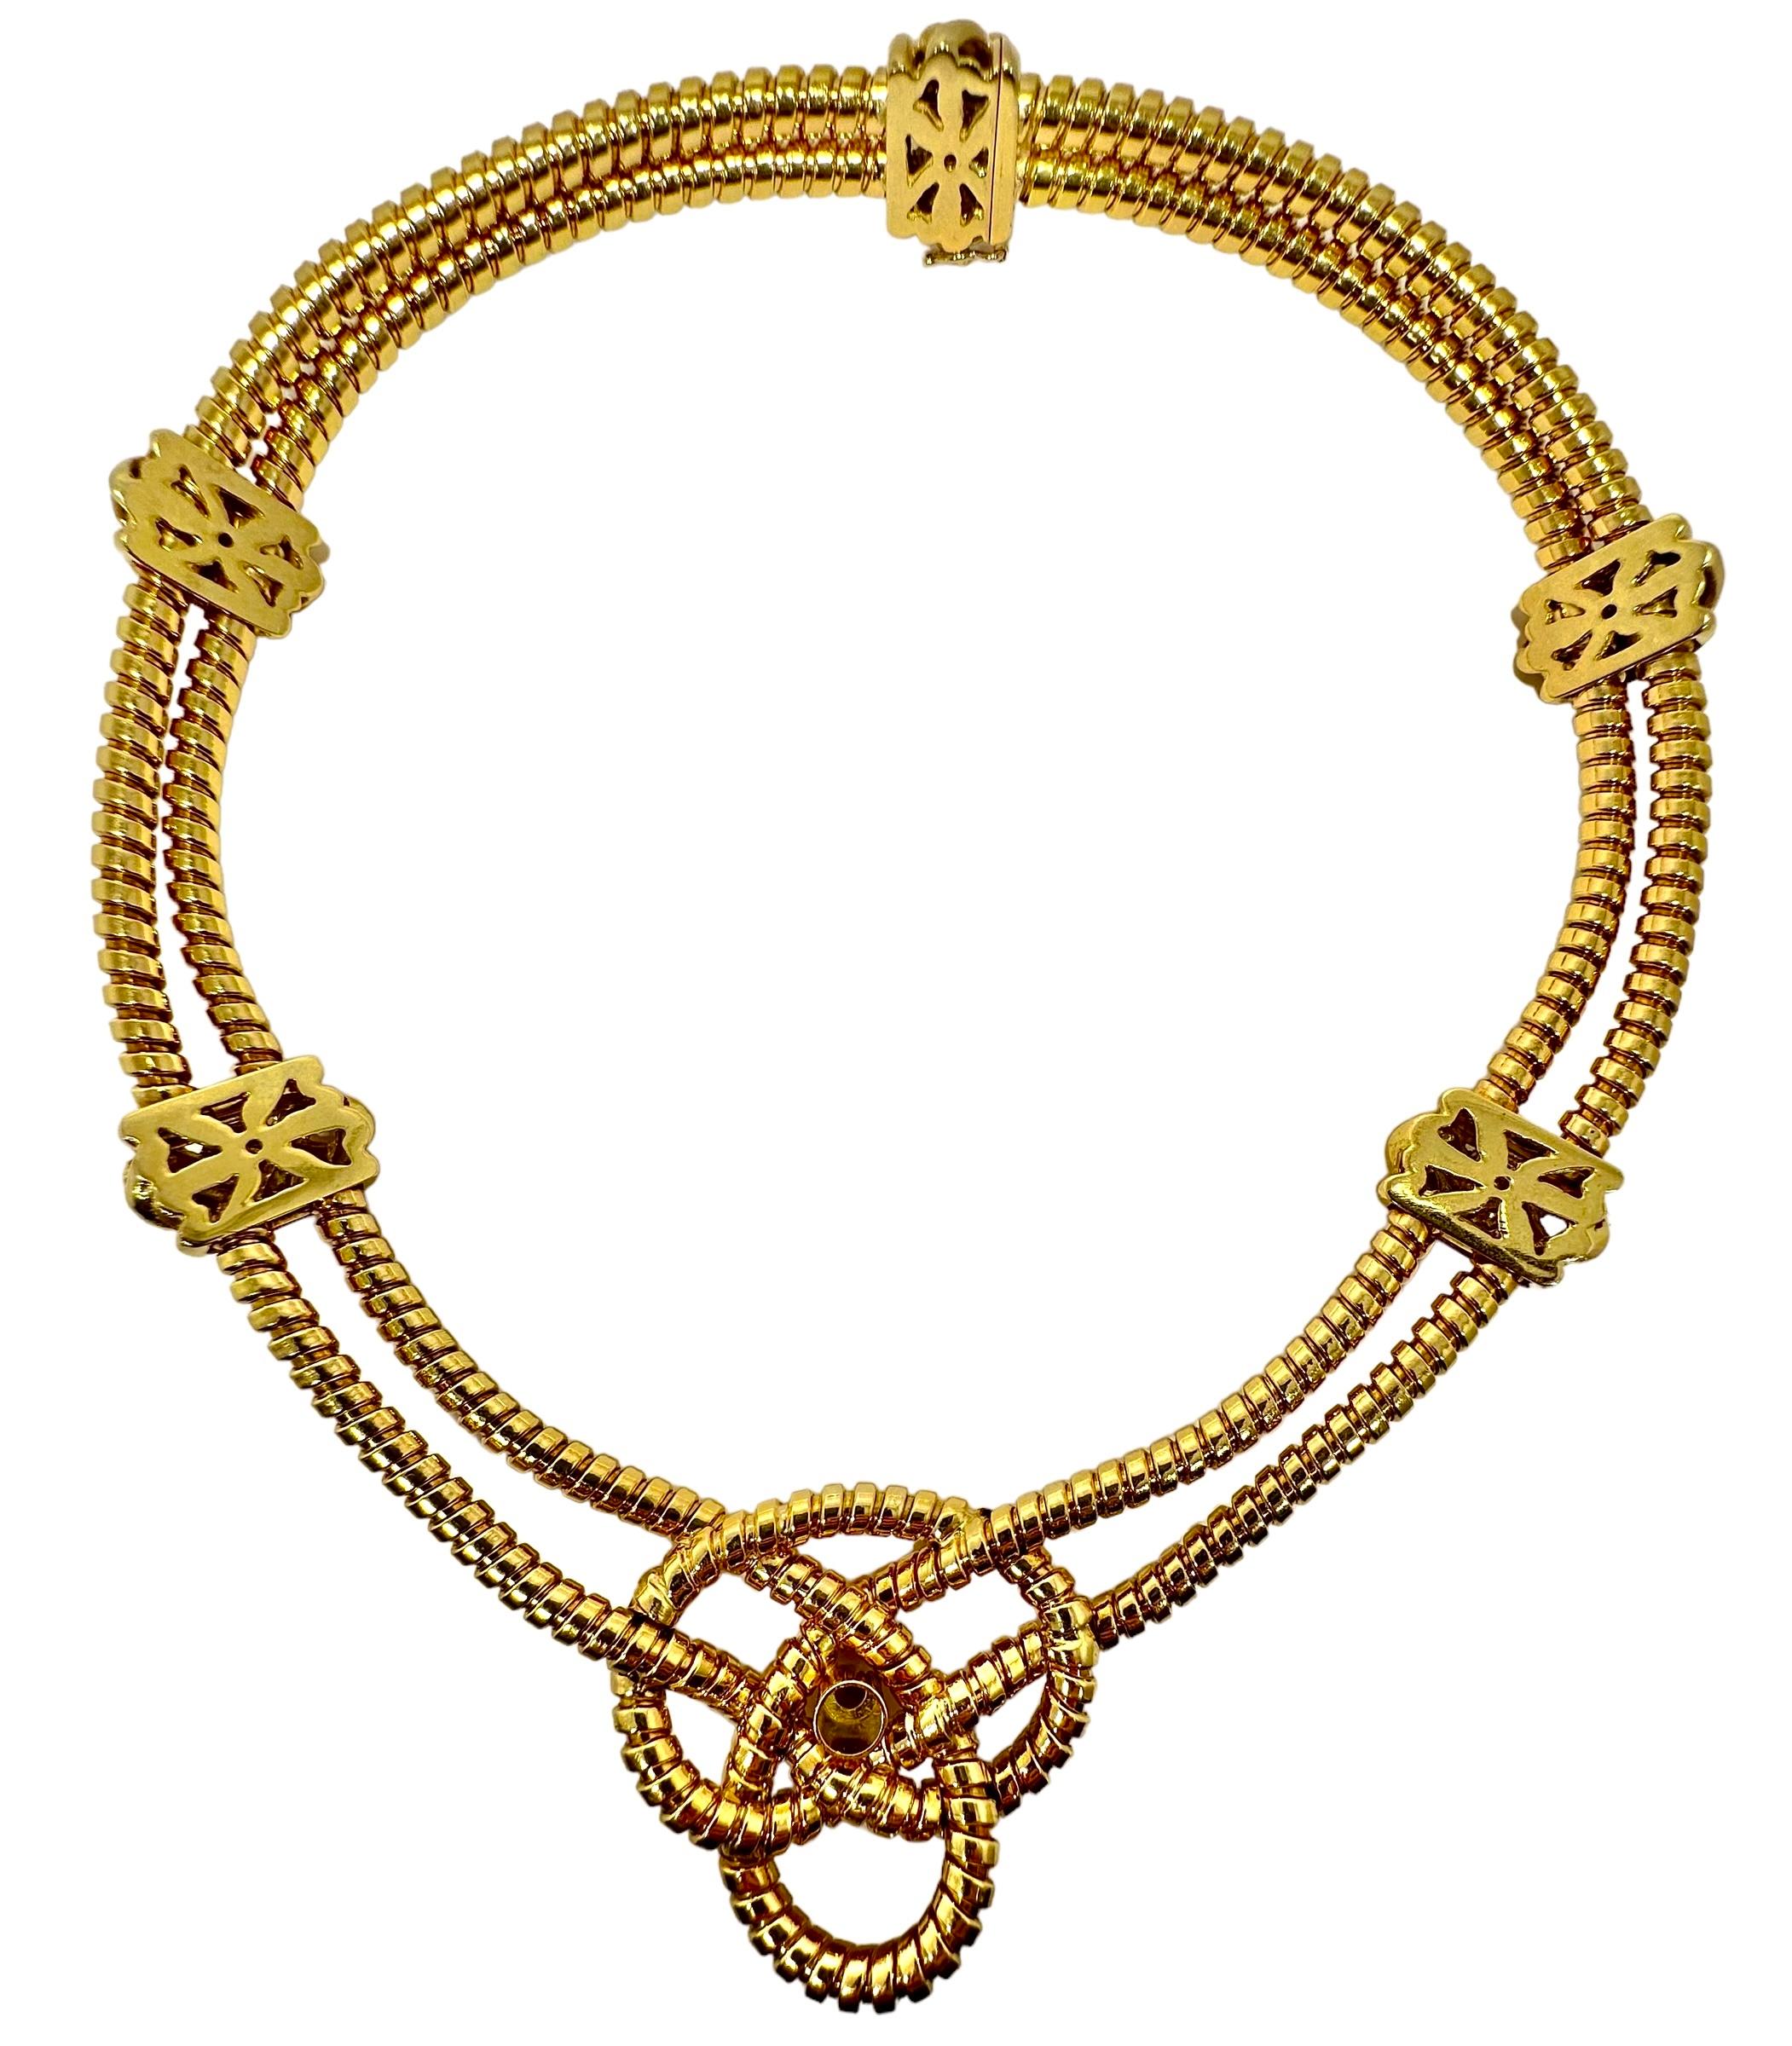 Modern Verdura 18K Gold Double Strand Tubogas Choker Necklace with Cabochon Rubies For Sale